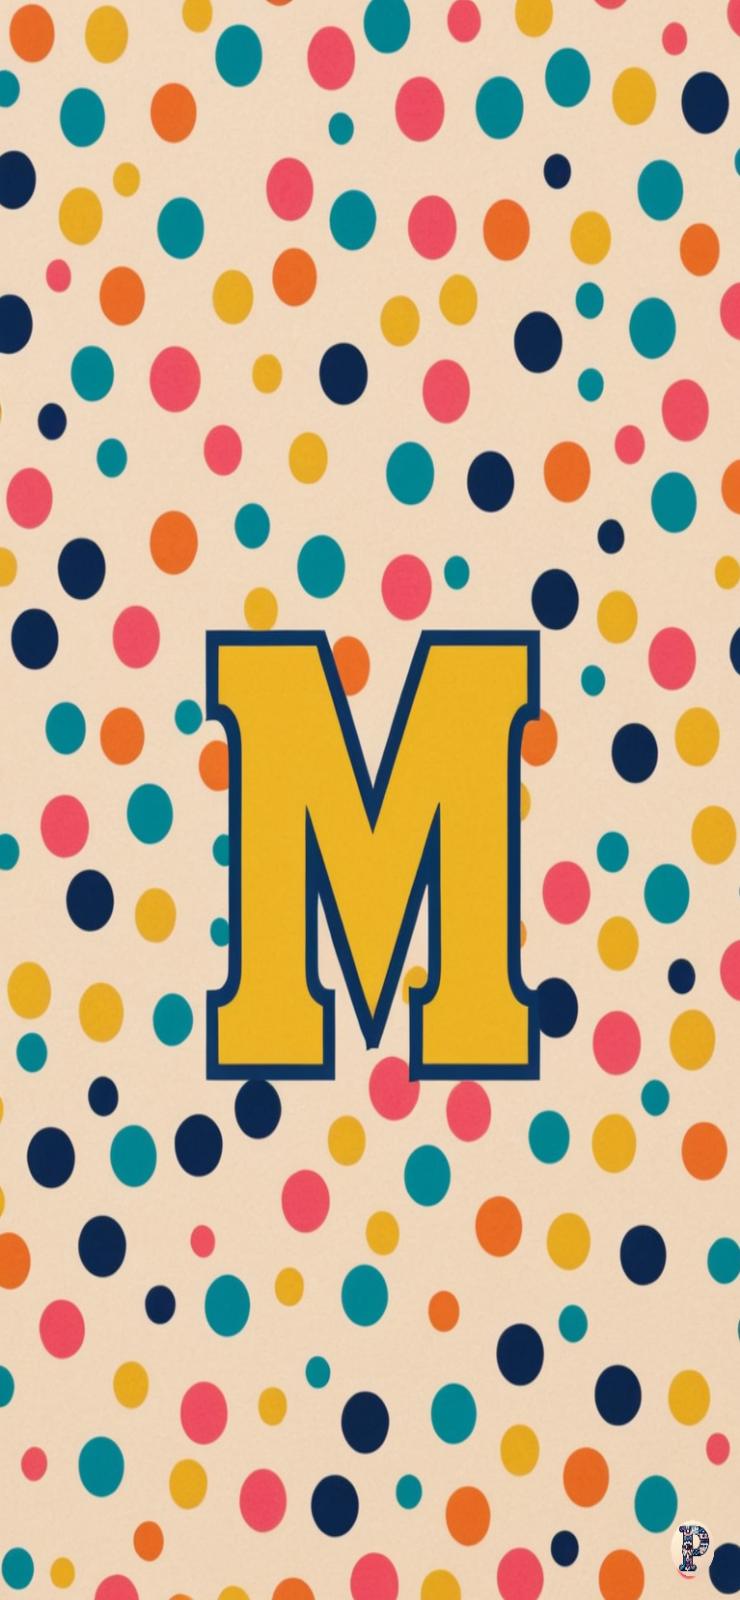 Preppy m wallpapers for phone